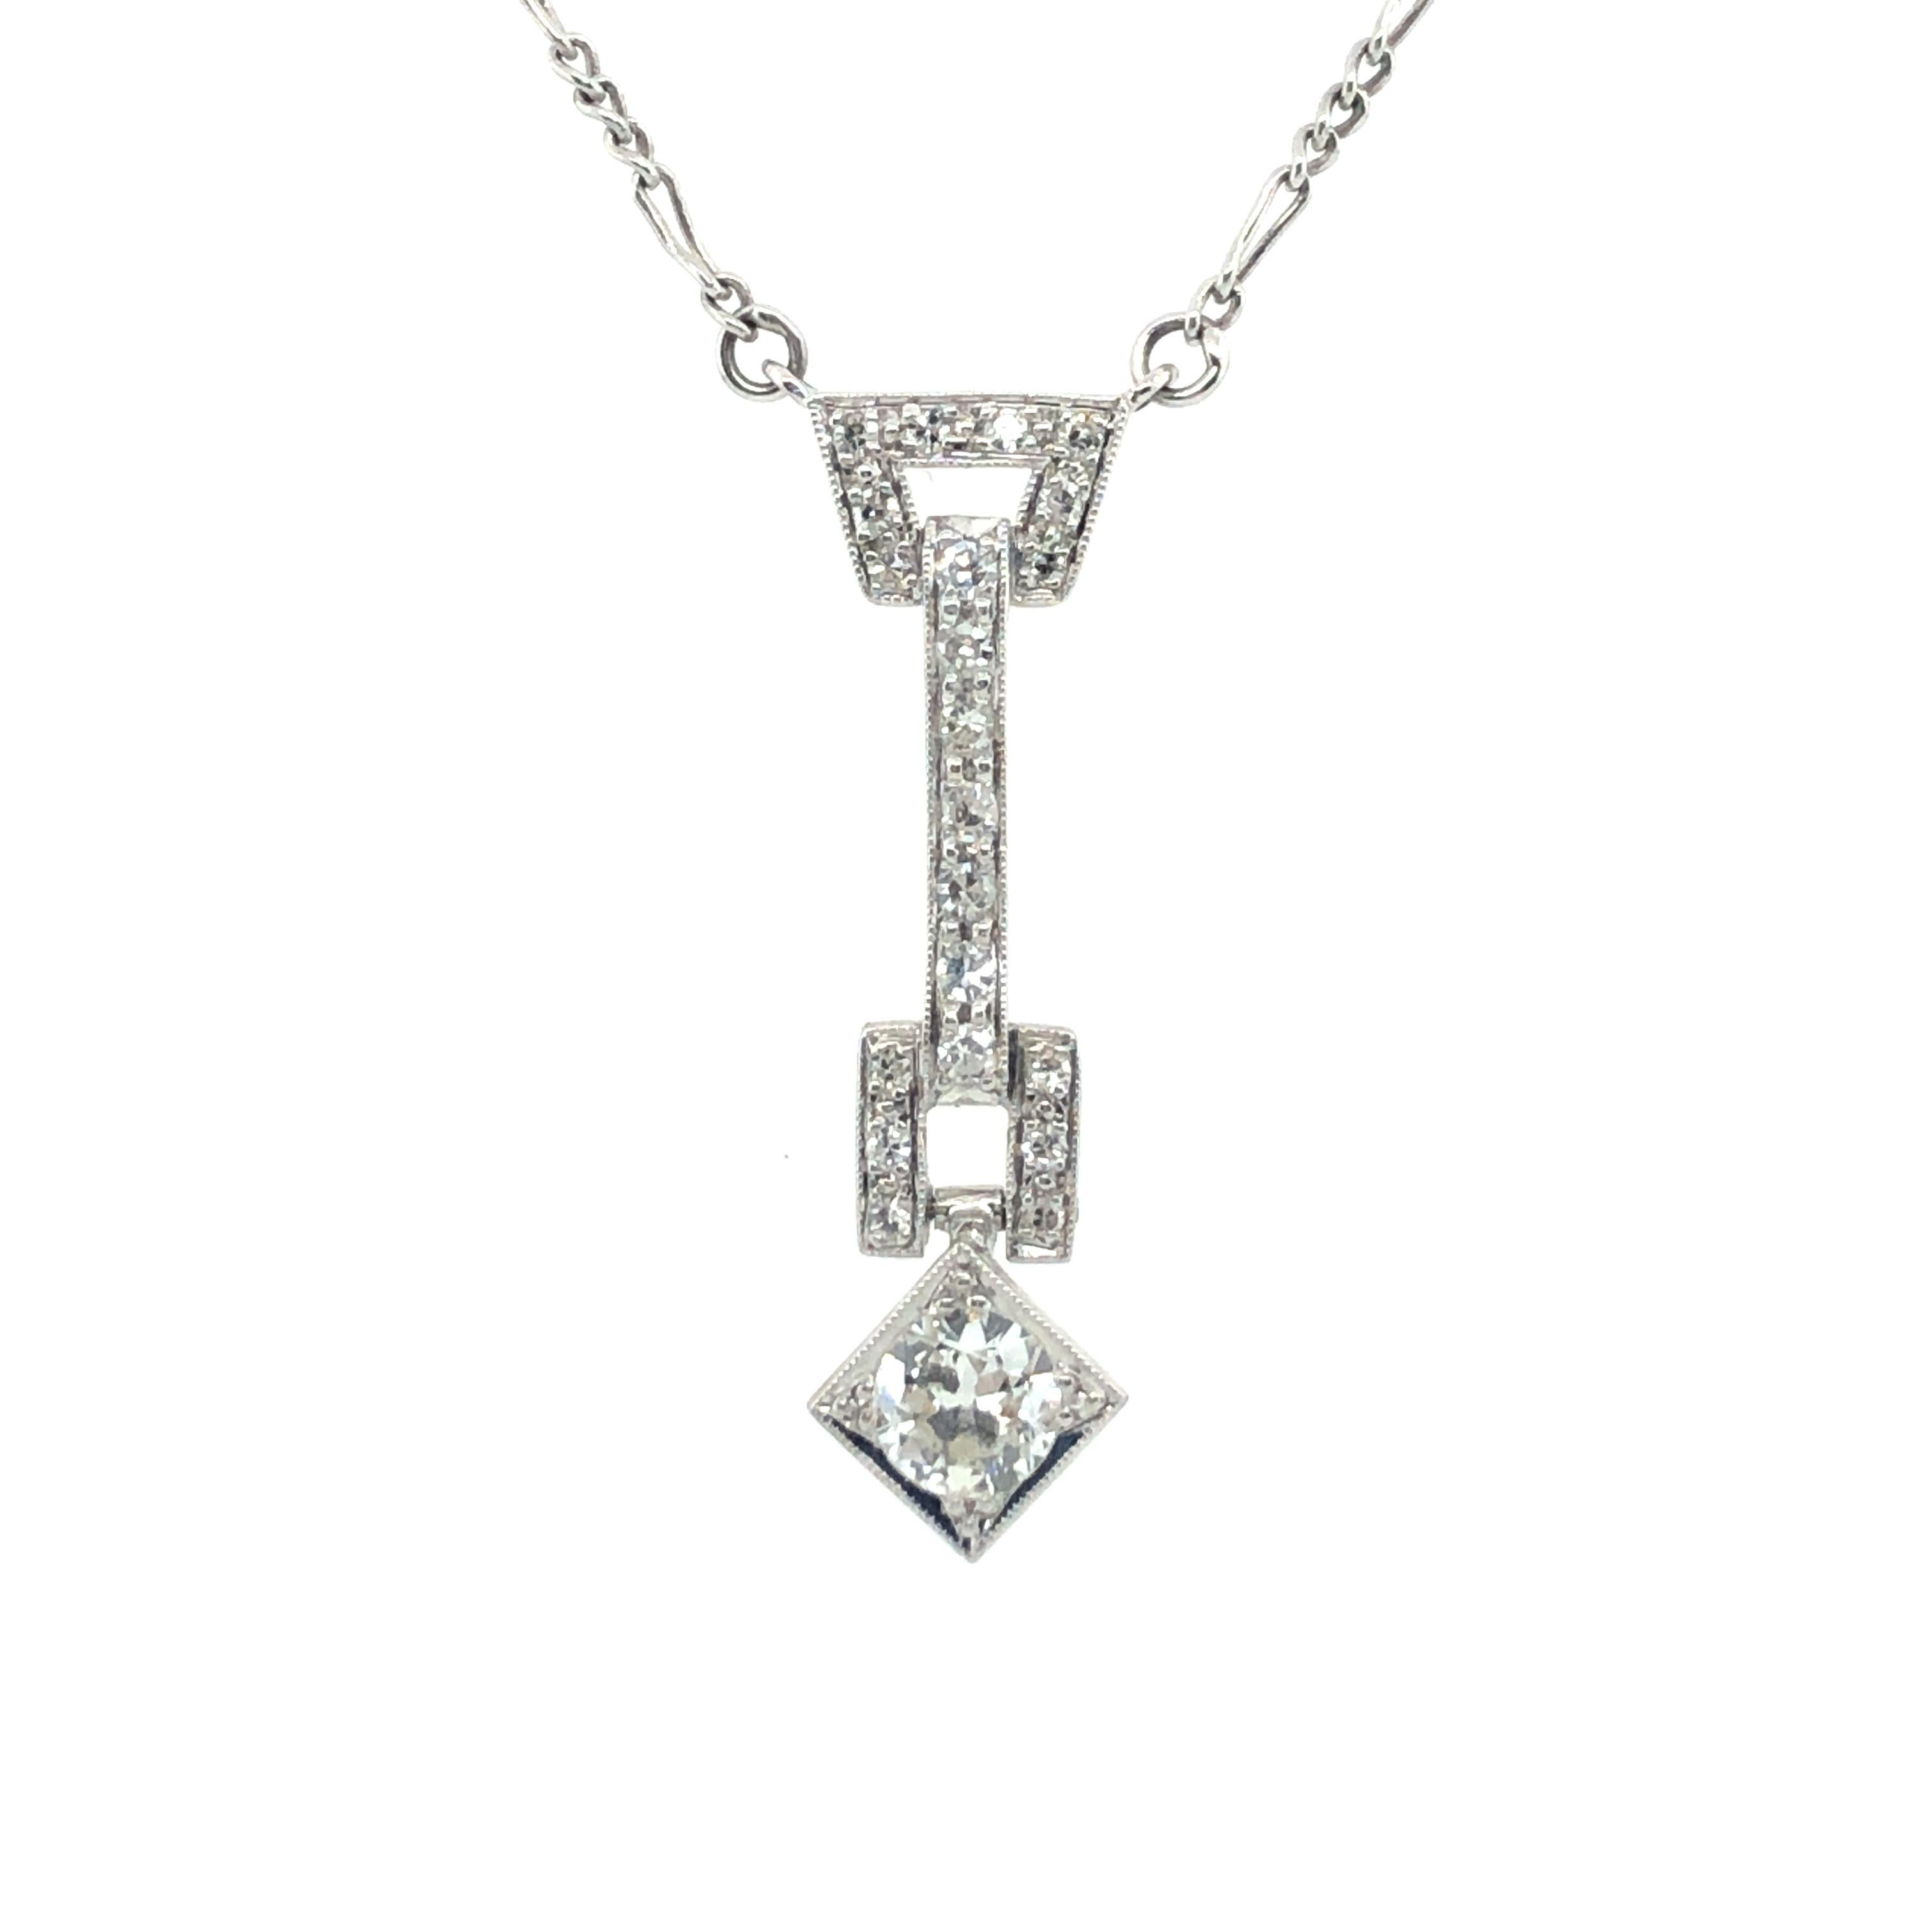 This beautiful geometric art deco necklace is finely crafted in platinum 950 and set with an old European cut diamond of approximately 0.35 carats, H/I colour and si/i clarity.
The elongated, elegant upper part of the pendant is set with 21